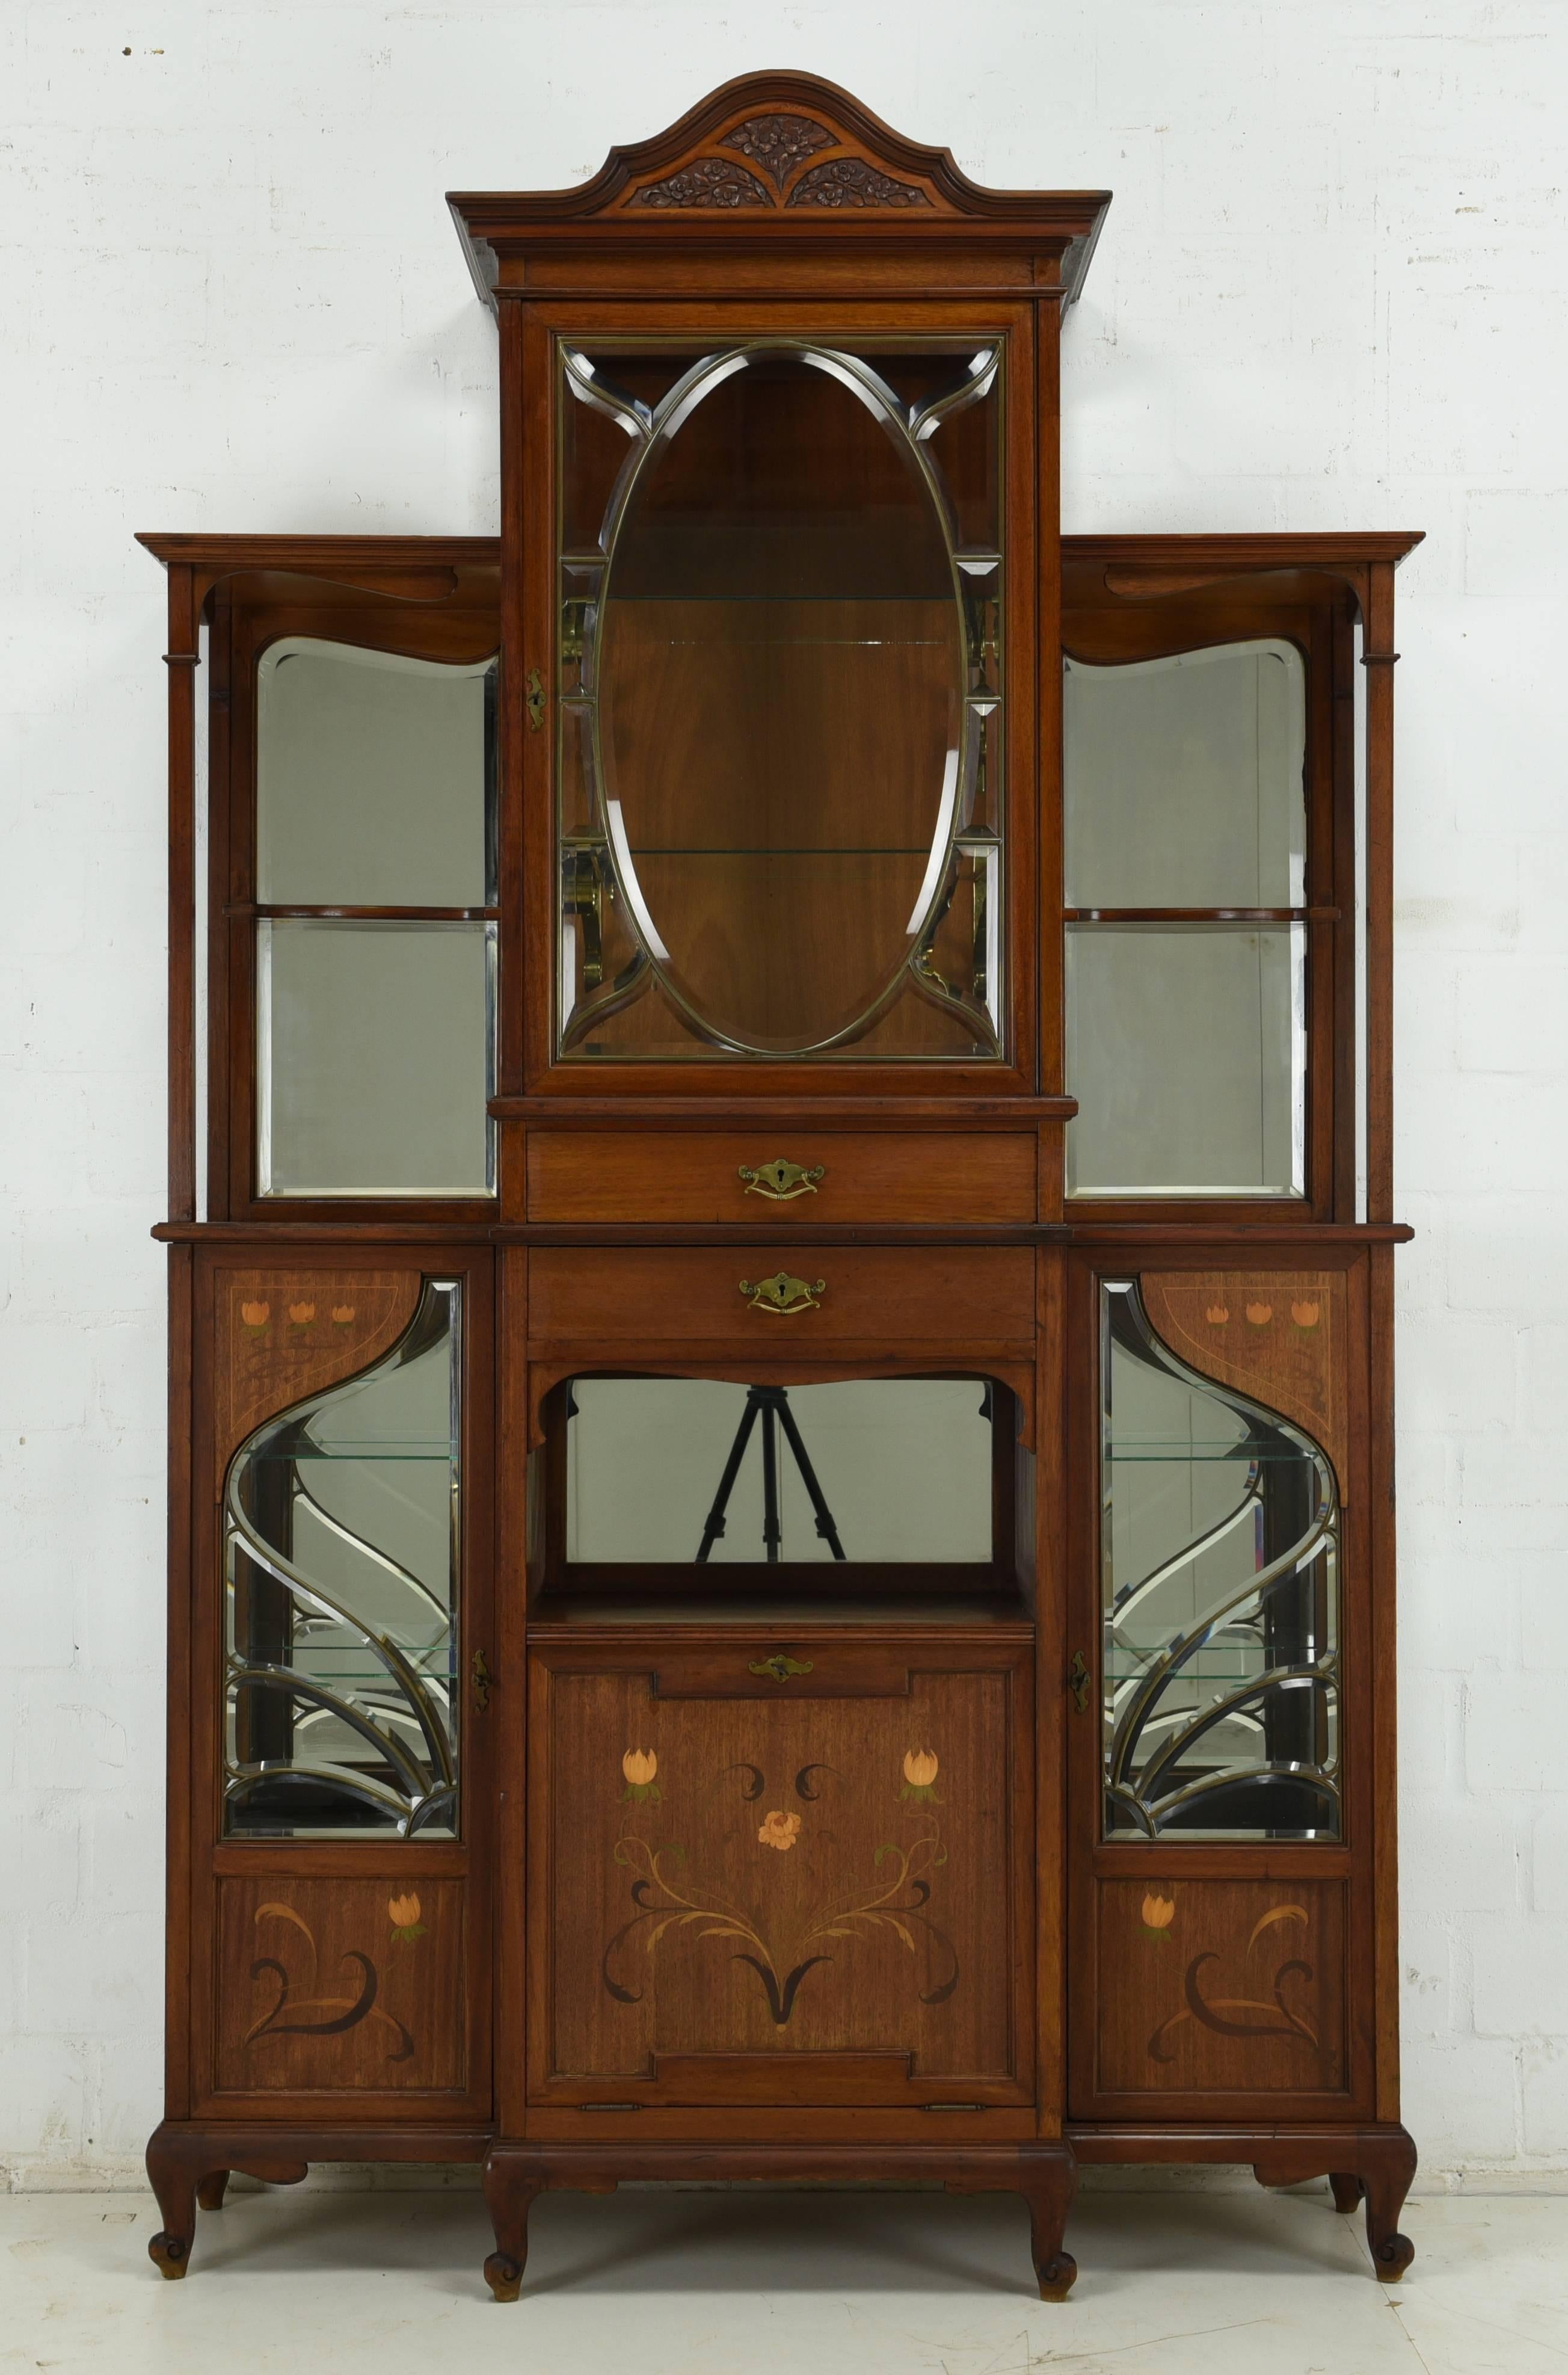 An antique Art Nouveau from circa 1915 made of mahogany. This masterpiece was manufactured with a very high quality workmanship and complex ornamentations. Big mirrors on both sides and glass walls are perfect for displaying your items. Glass floors